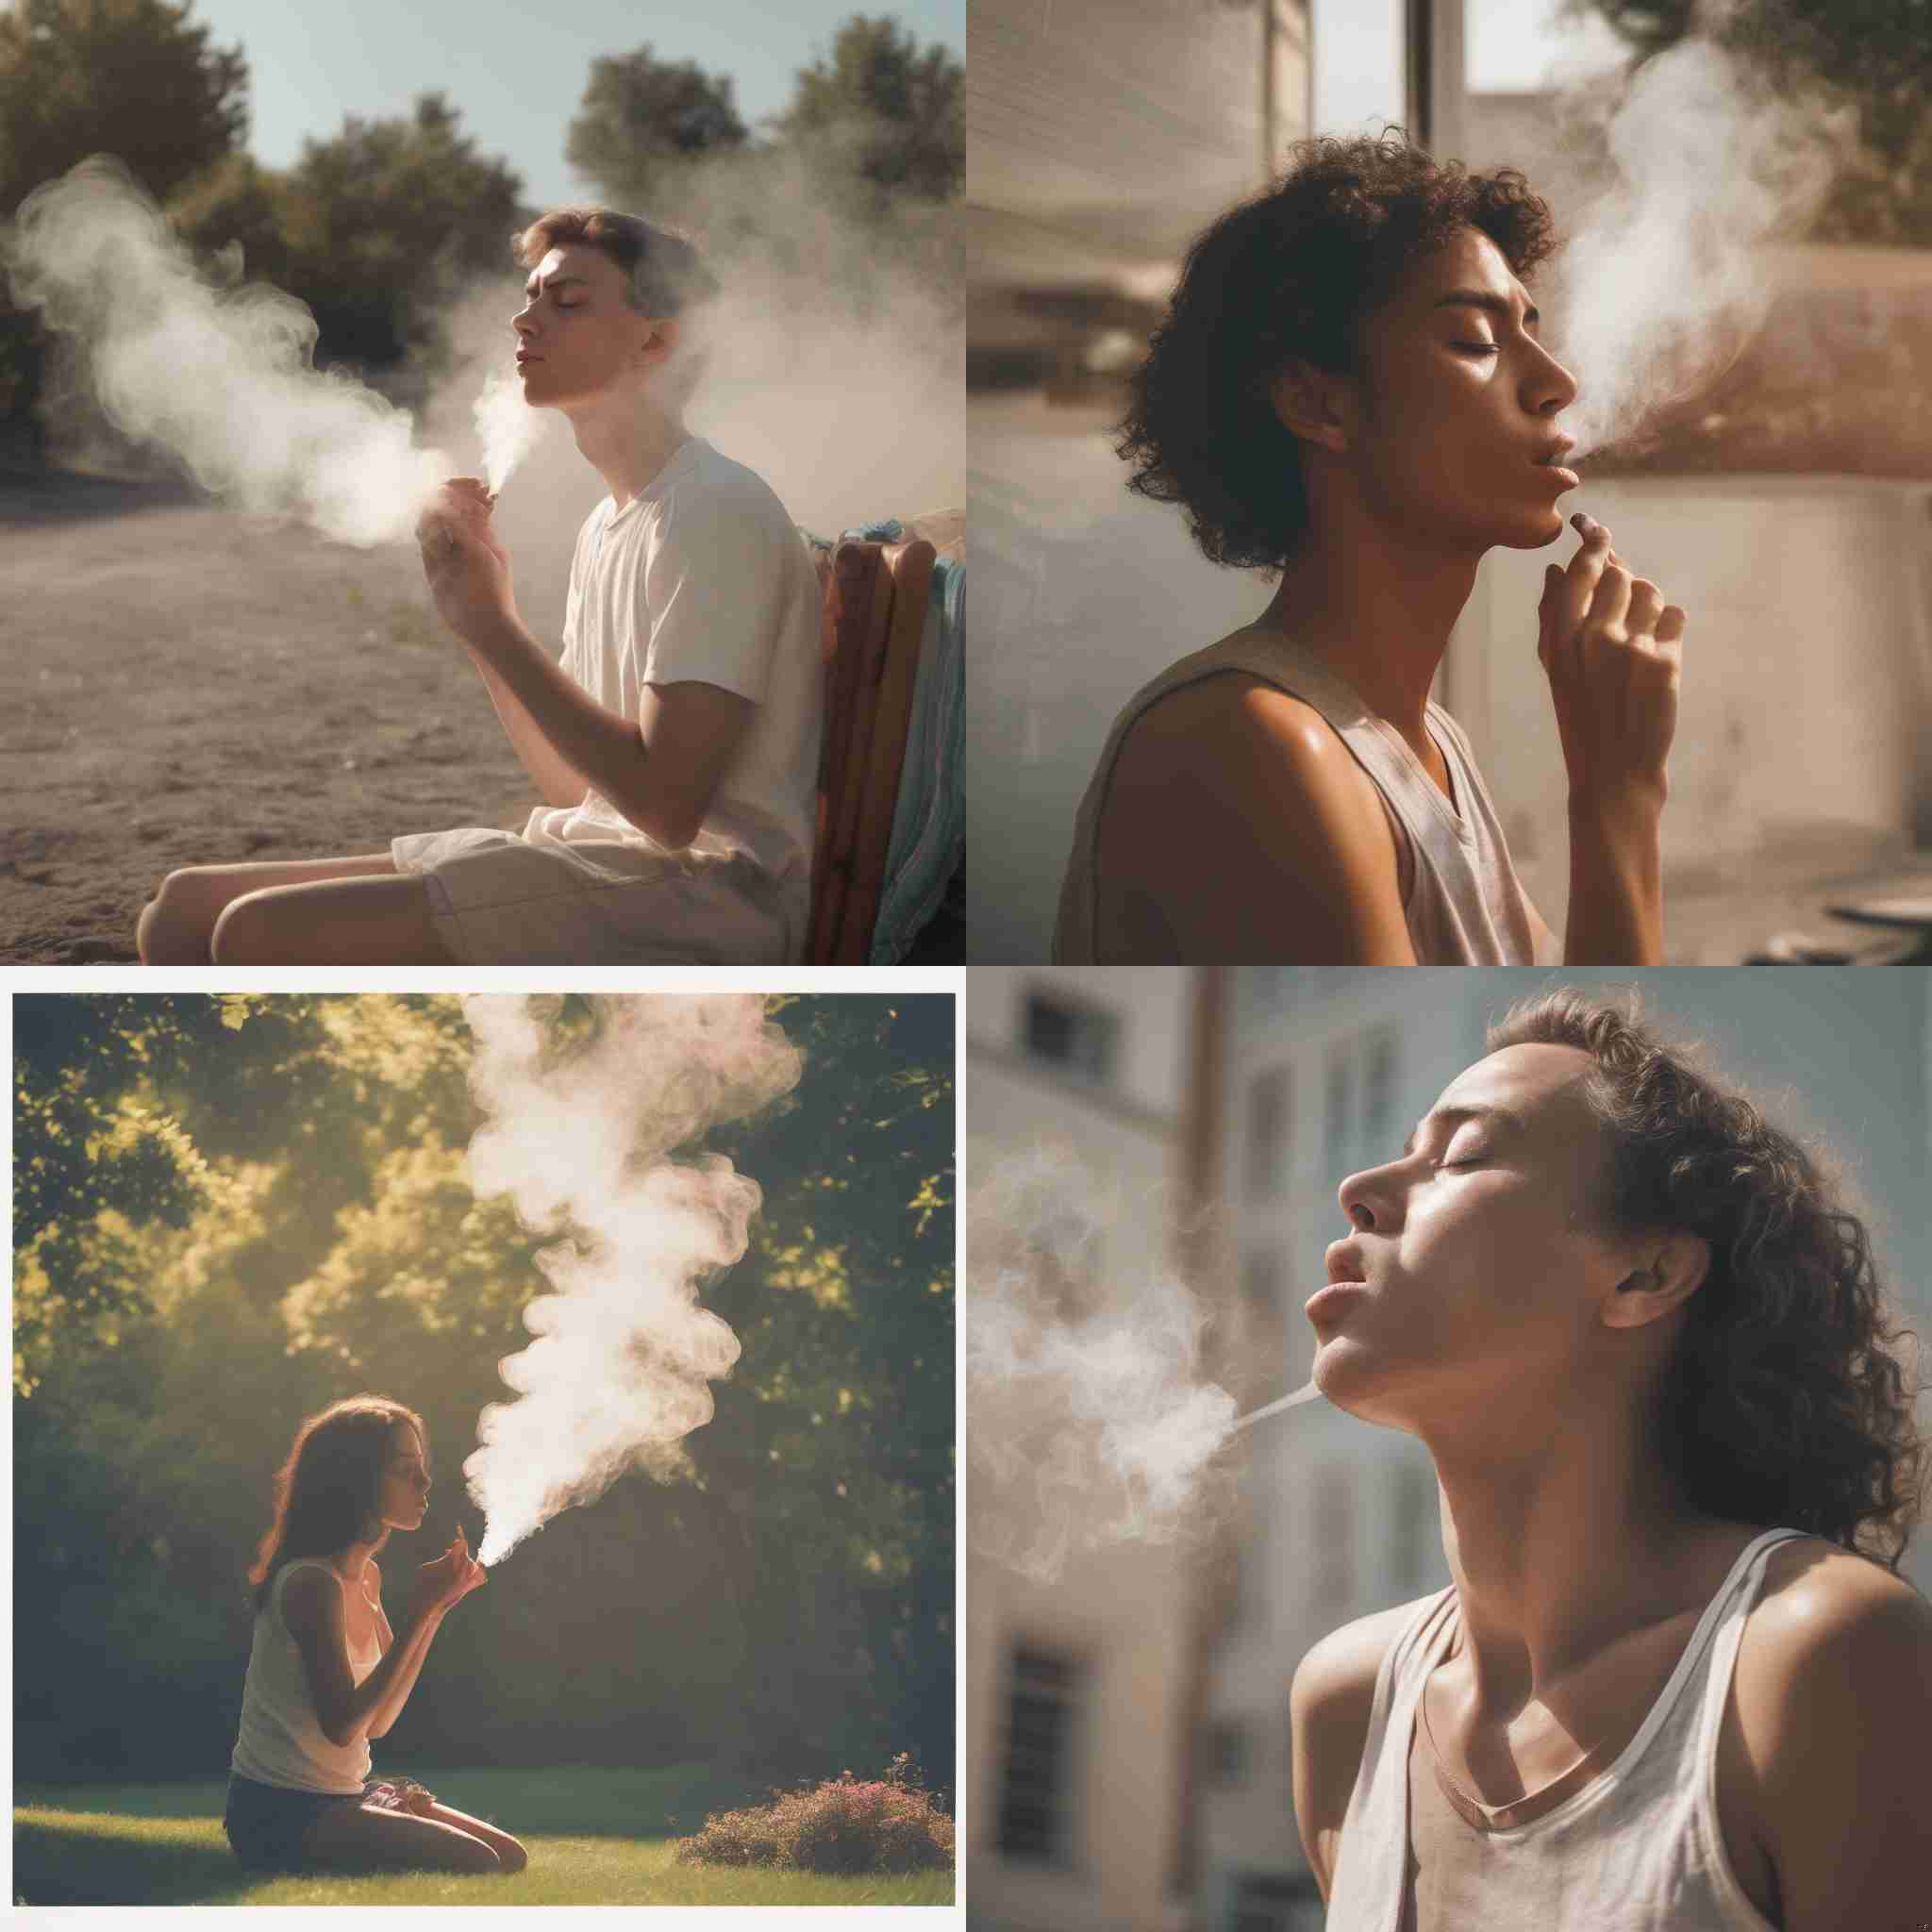 A person exhaling on a hot summer day